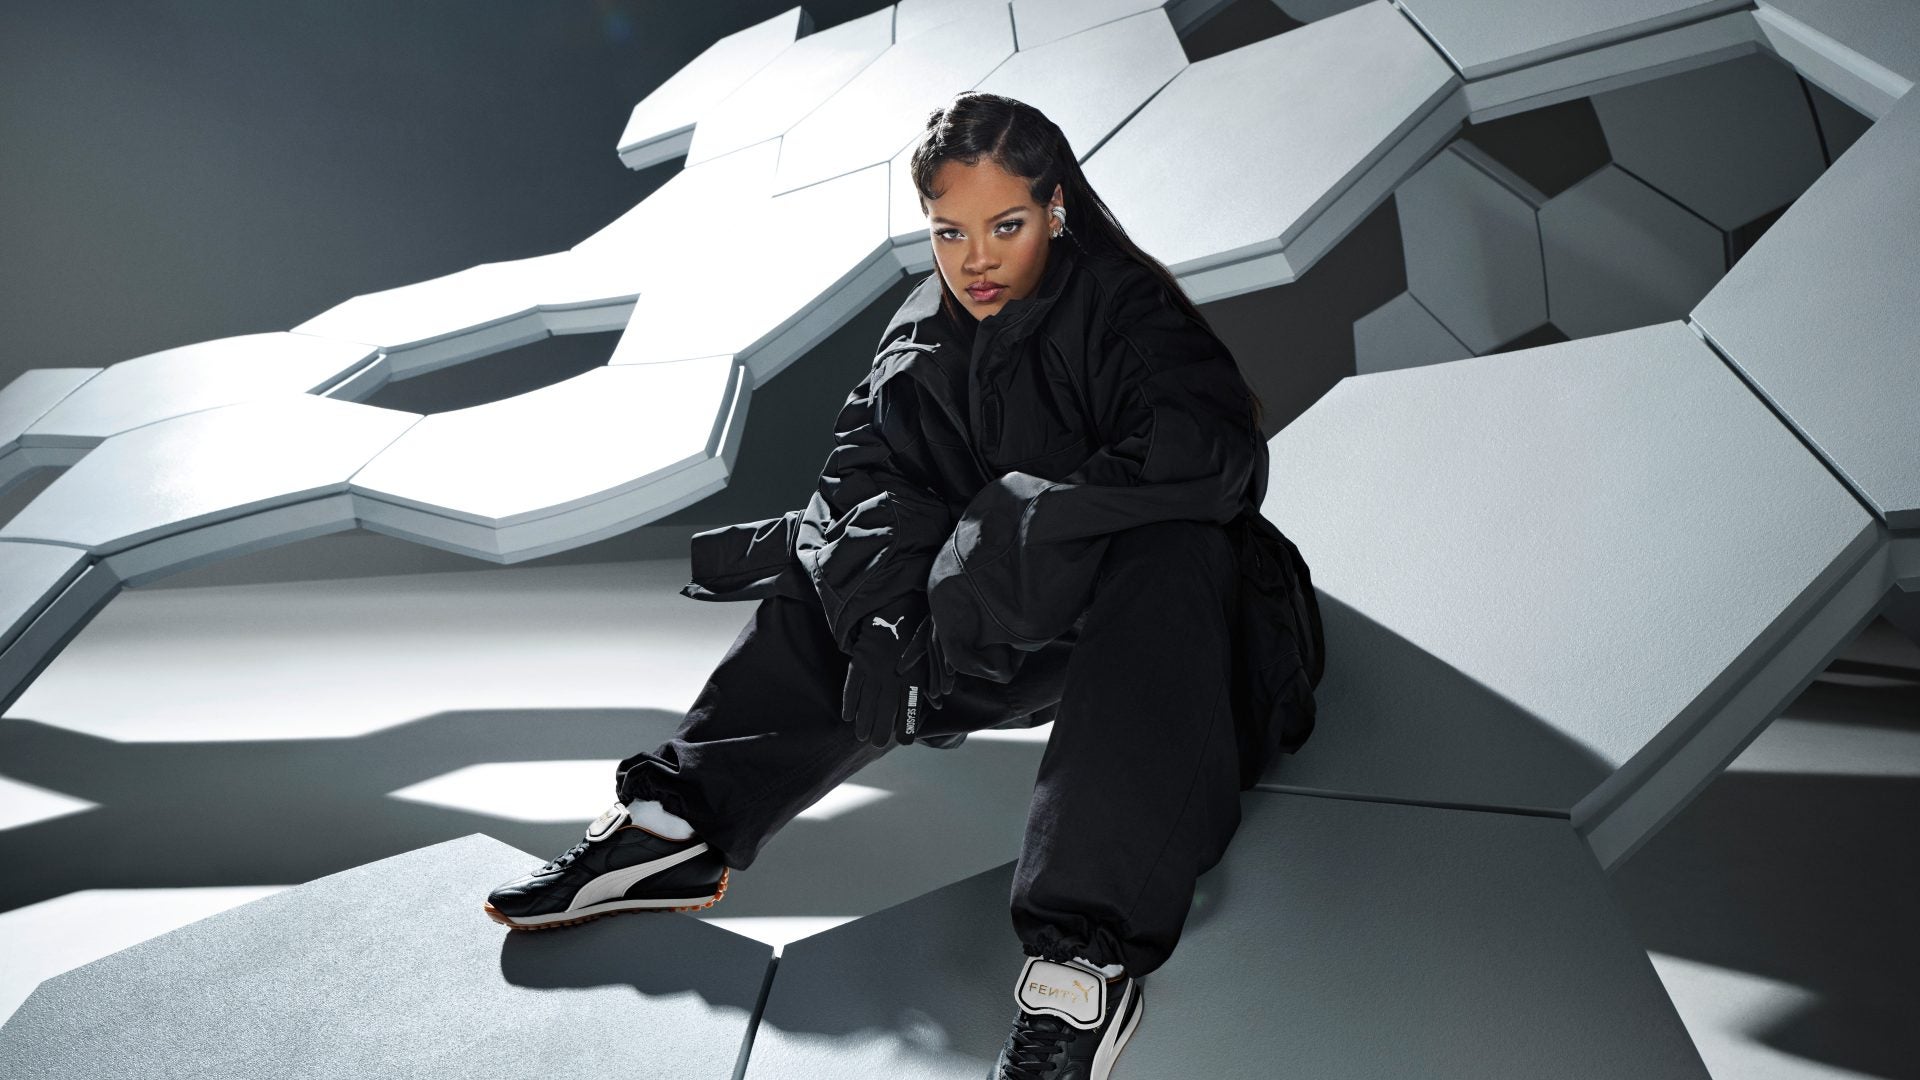 Fenty X Puma Is Back With Rihanna’s Reign And A New Drop—The Avanti